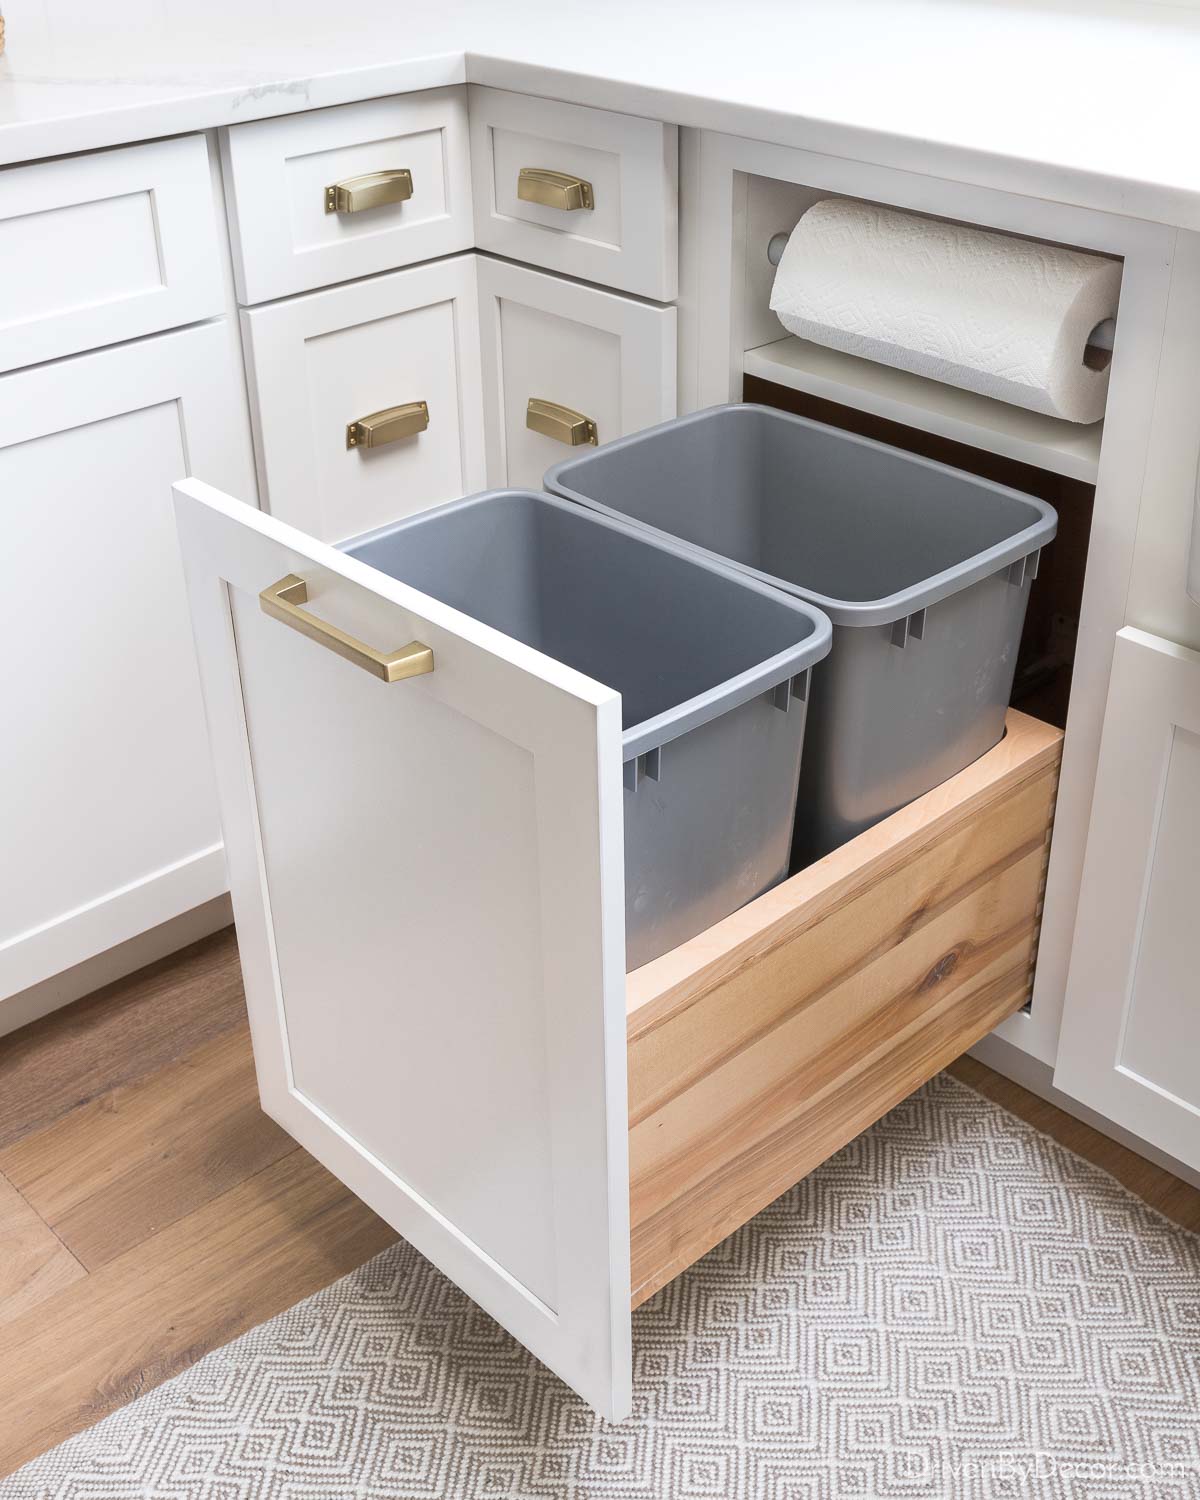 Kitchen cabinet with integrated paper towel holder